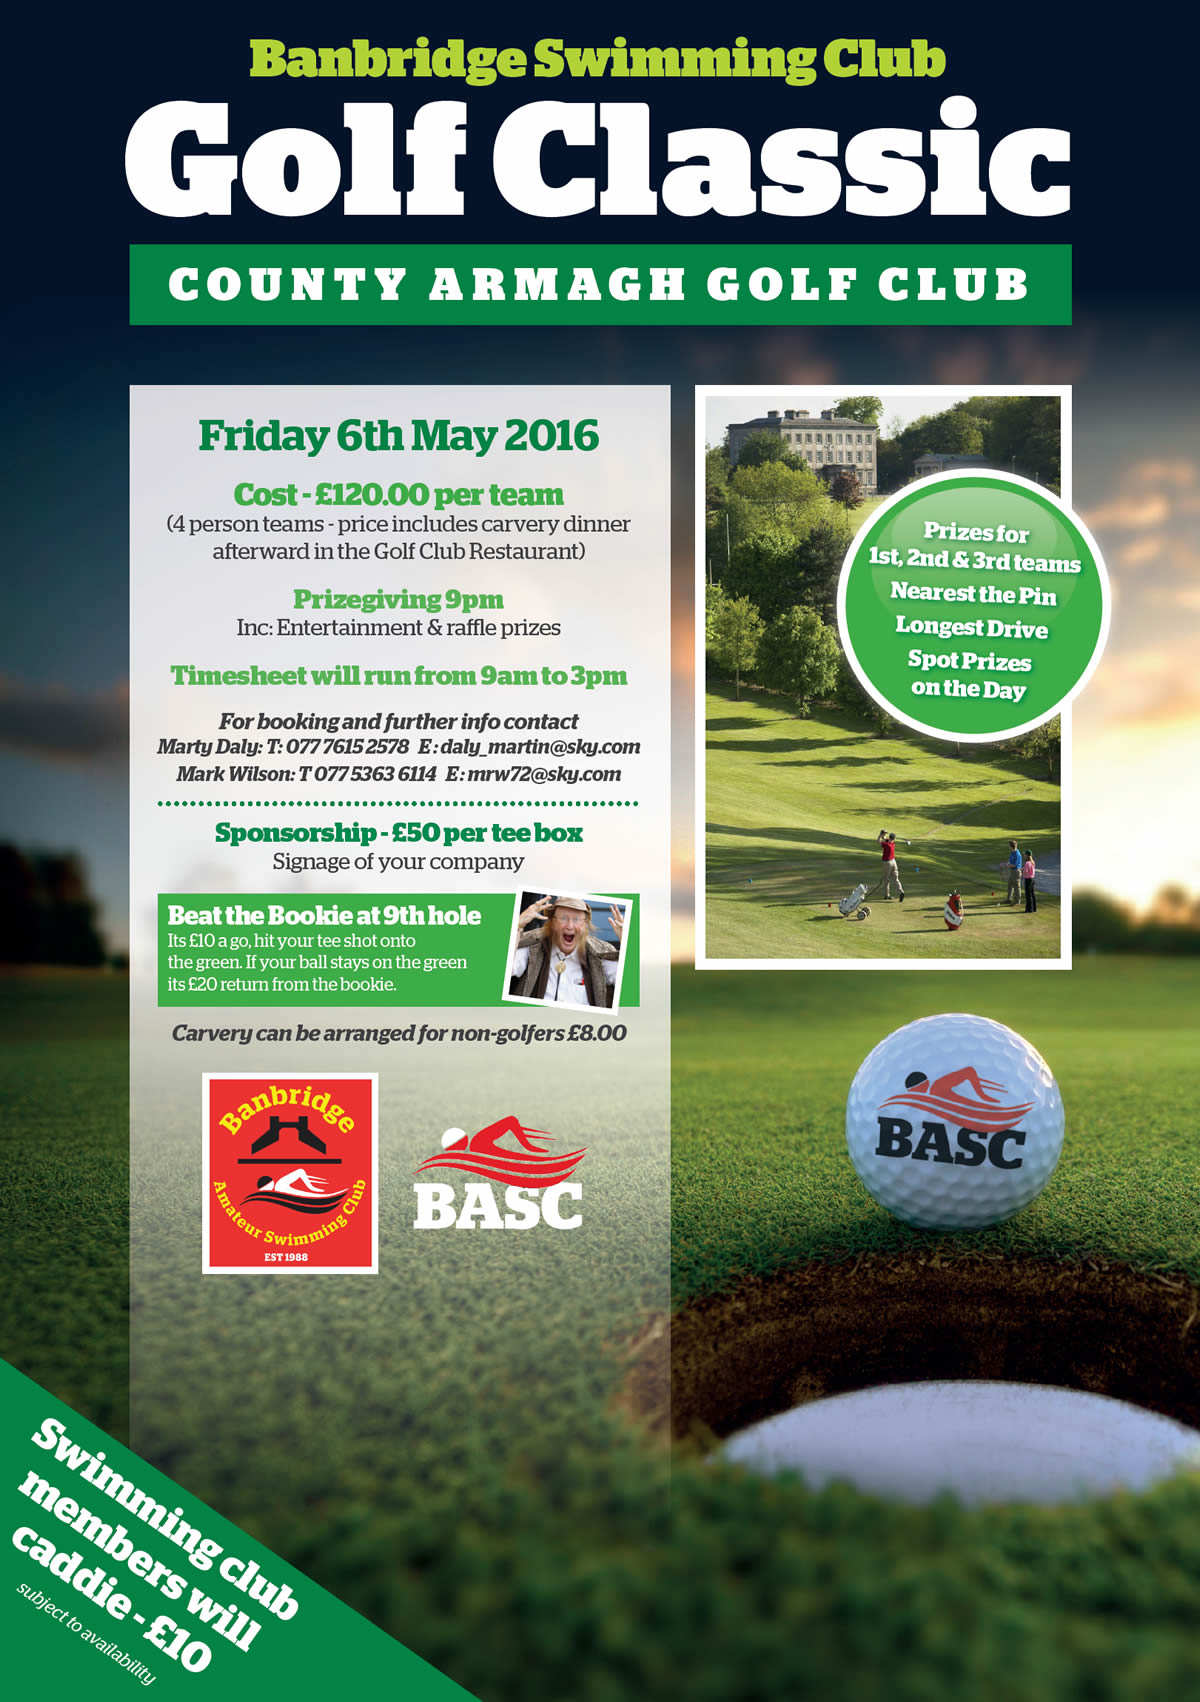 Banbridge Amateur Swimming Club are running a Golf Classic in County Armagh Golf Club on Friday 6th May and we would encourage as many members of County Armagh Golf Club to participate with us. Our Swimming Club is a Division 1 Club and produces swimmers that have successfully competed at Ulster, Irish and British levels.